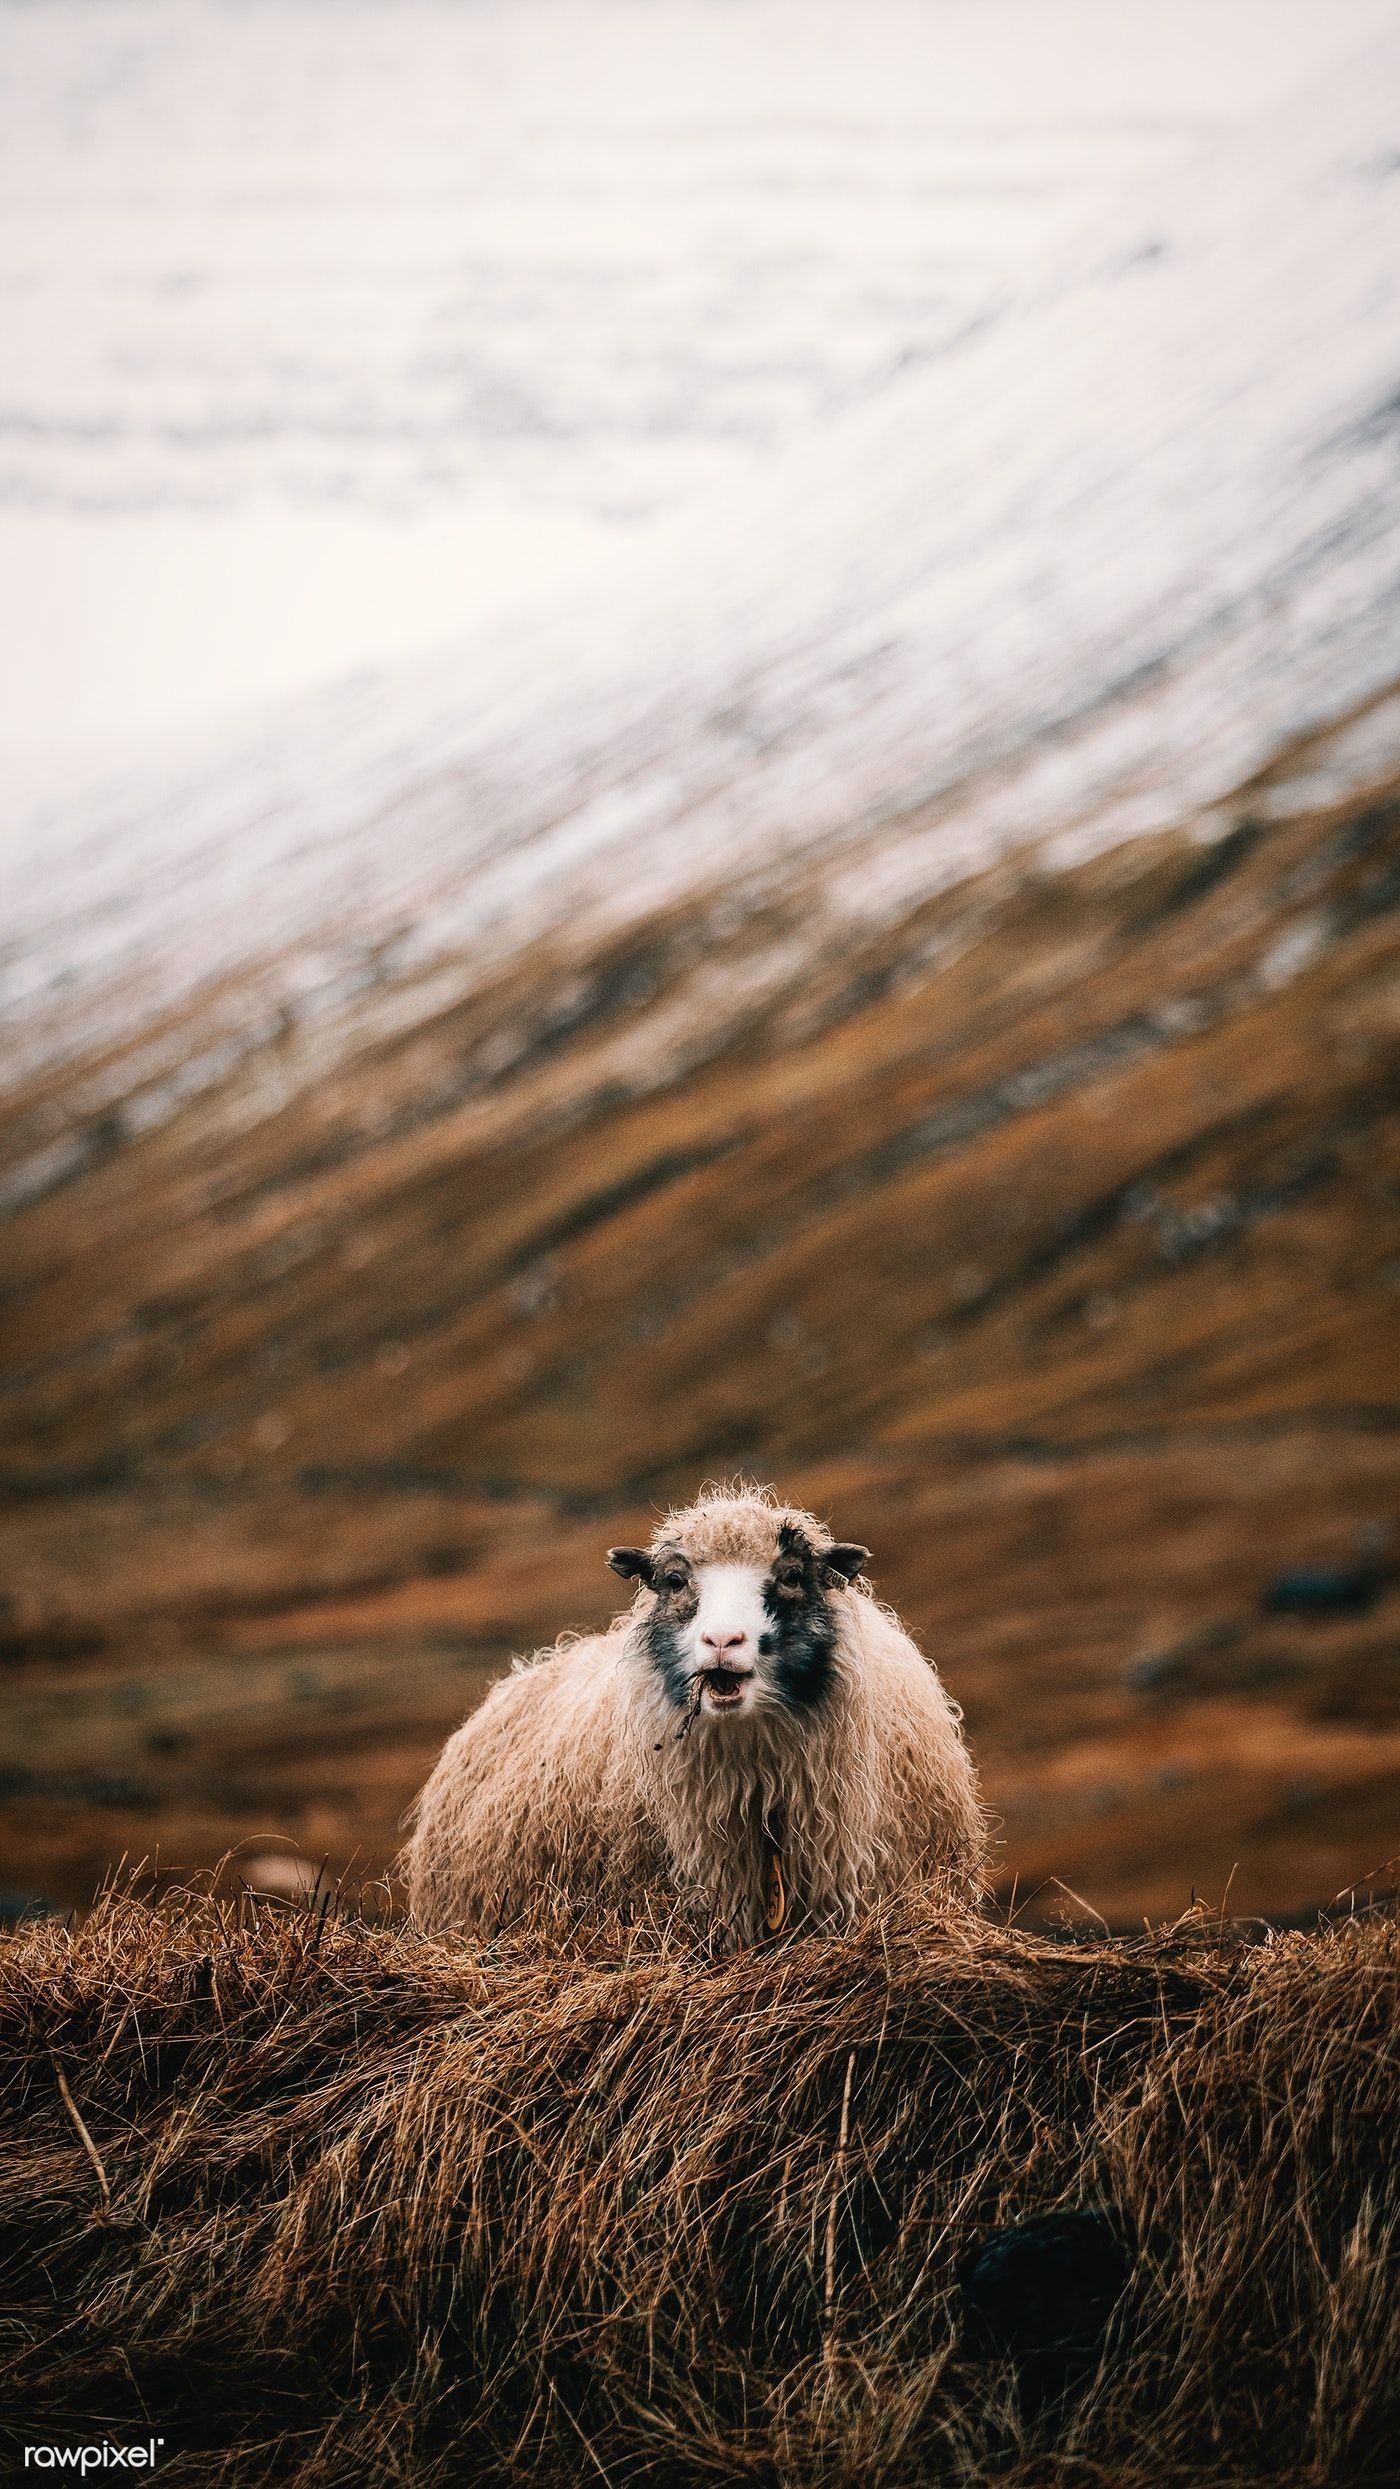 Photography inspiration, Dreamy sheep scenes, Inspiring captures, Artistic expressions in nature, 1400x2490 HD Handy